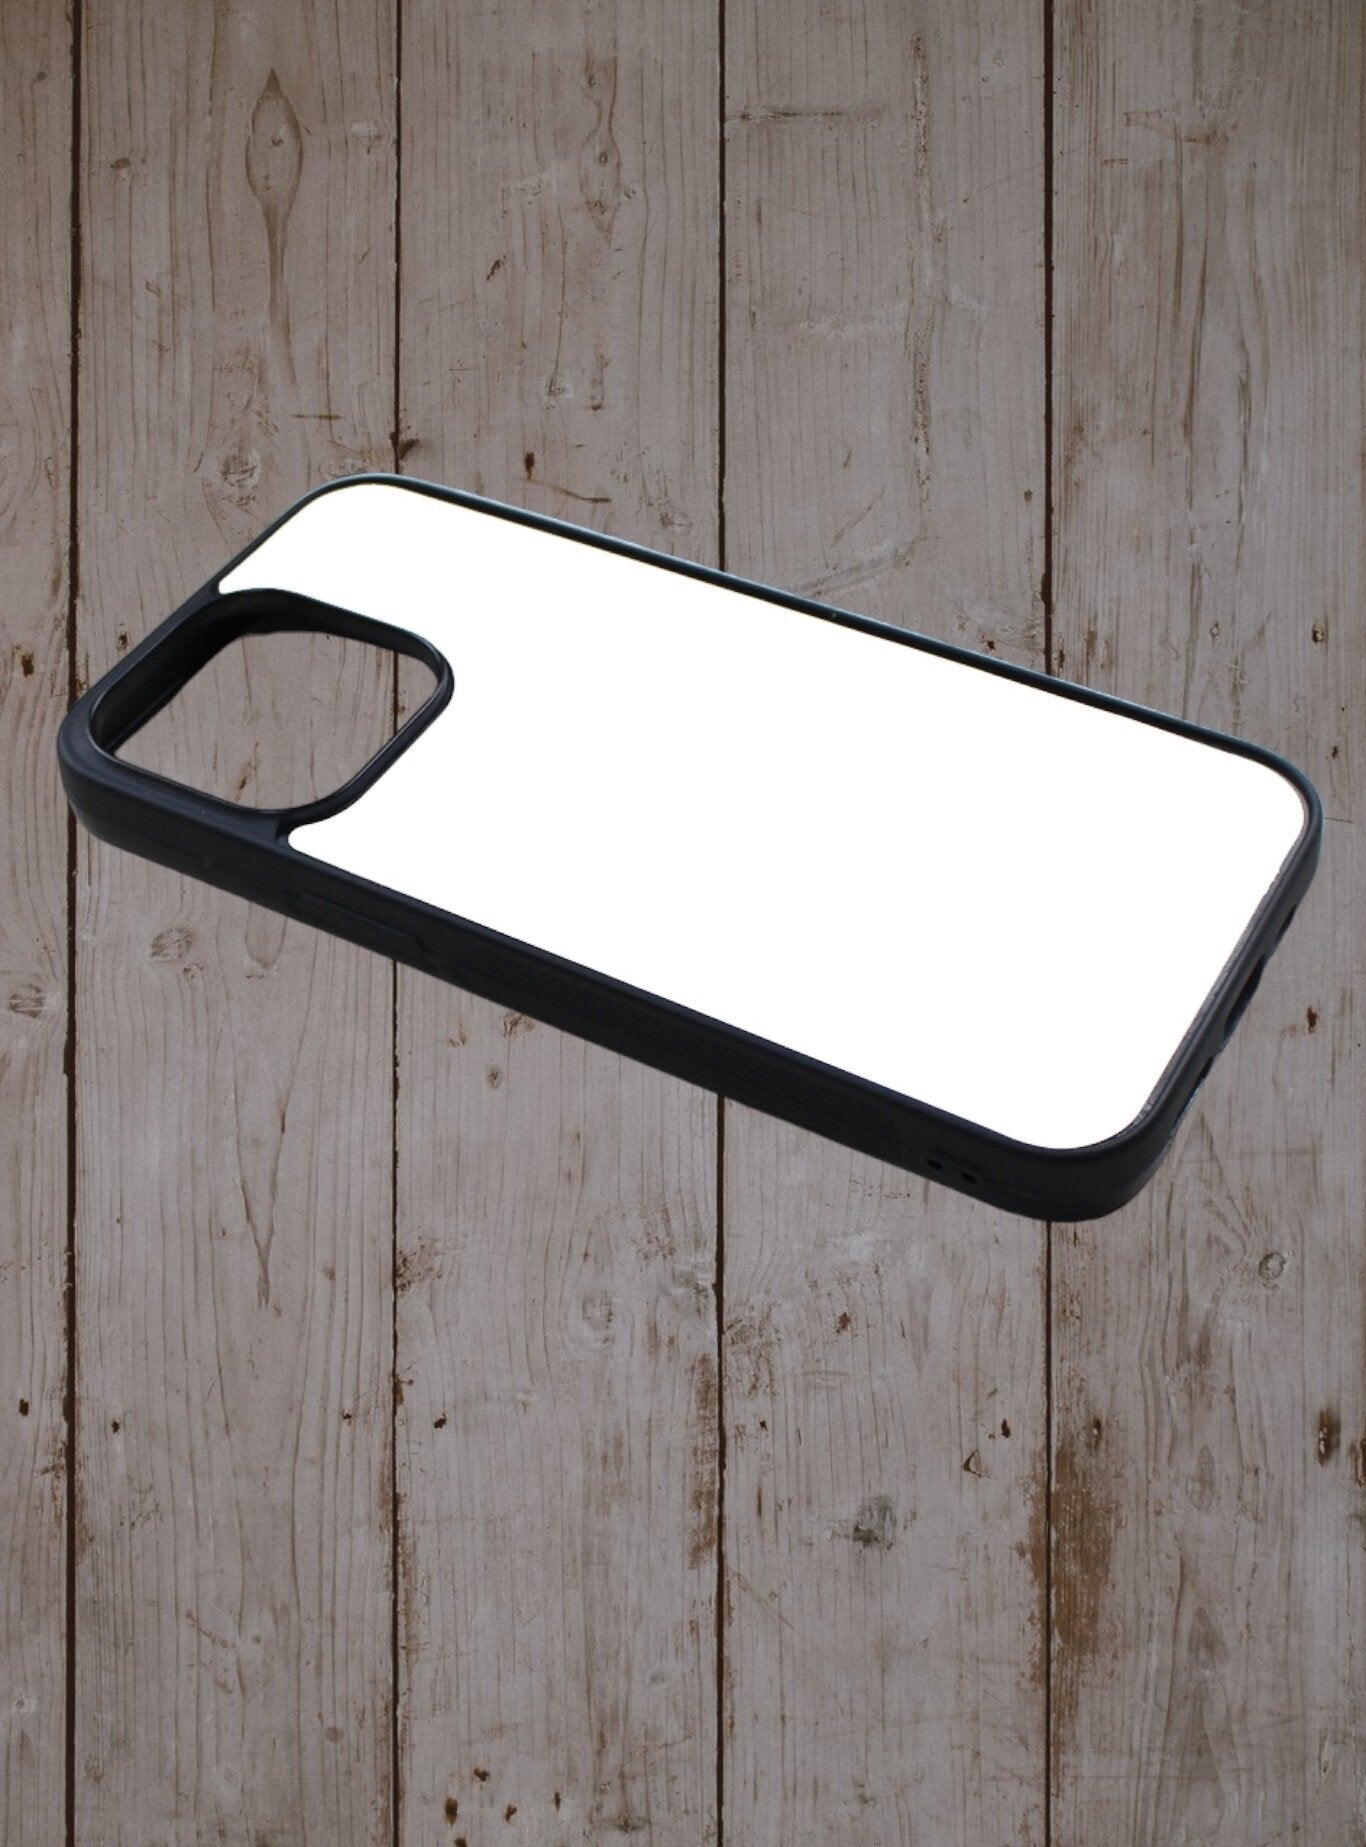 Iphone case - Cabin on the beach